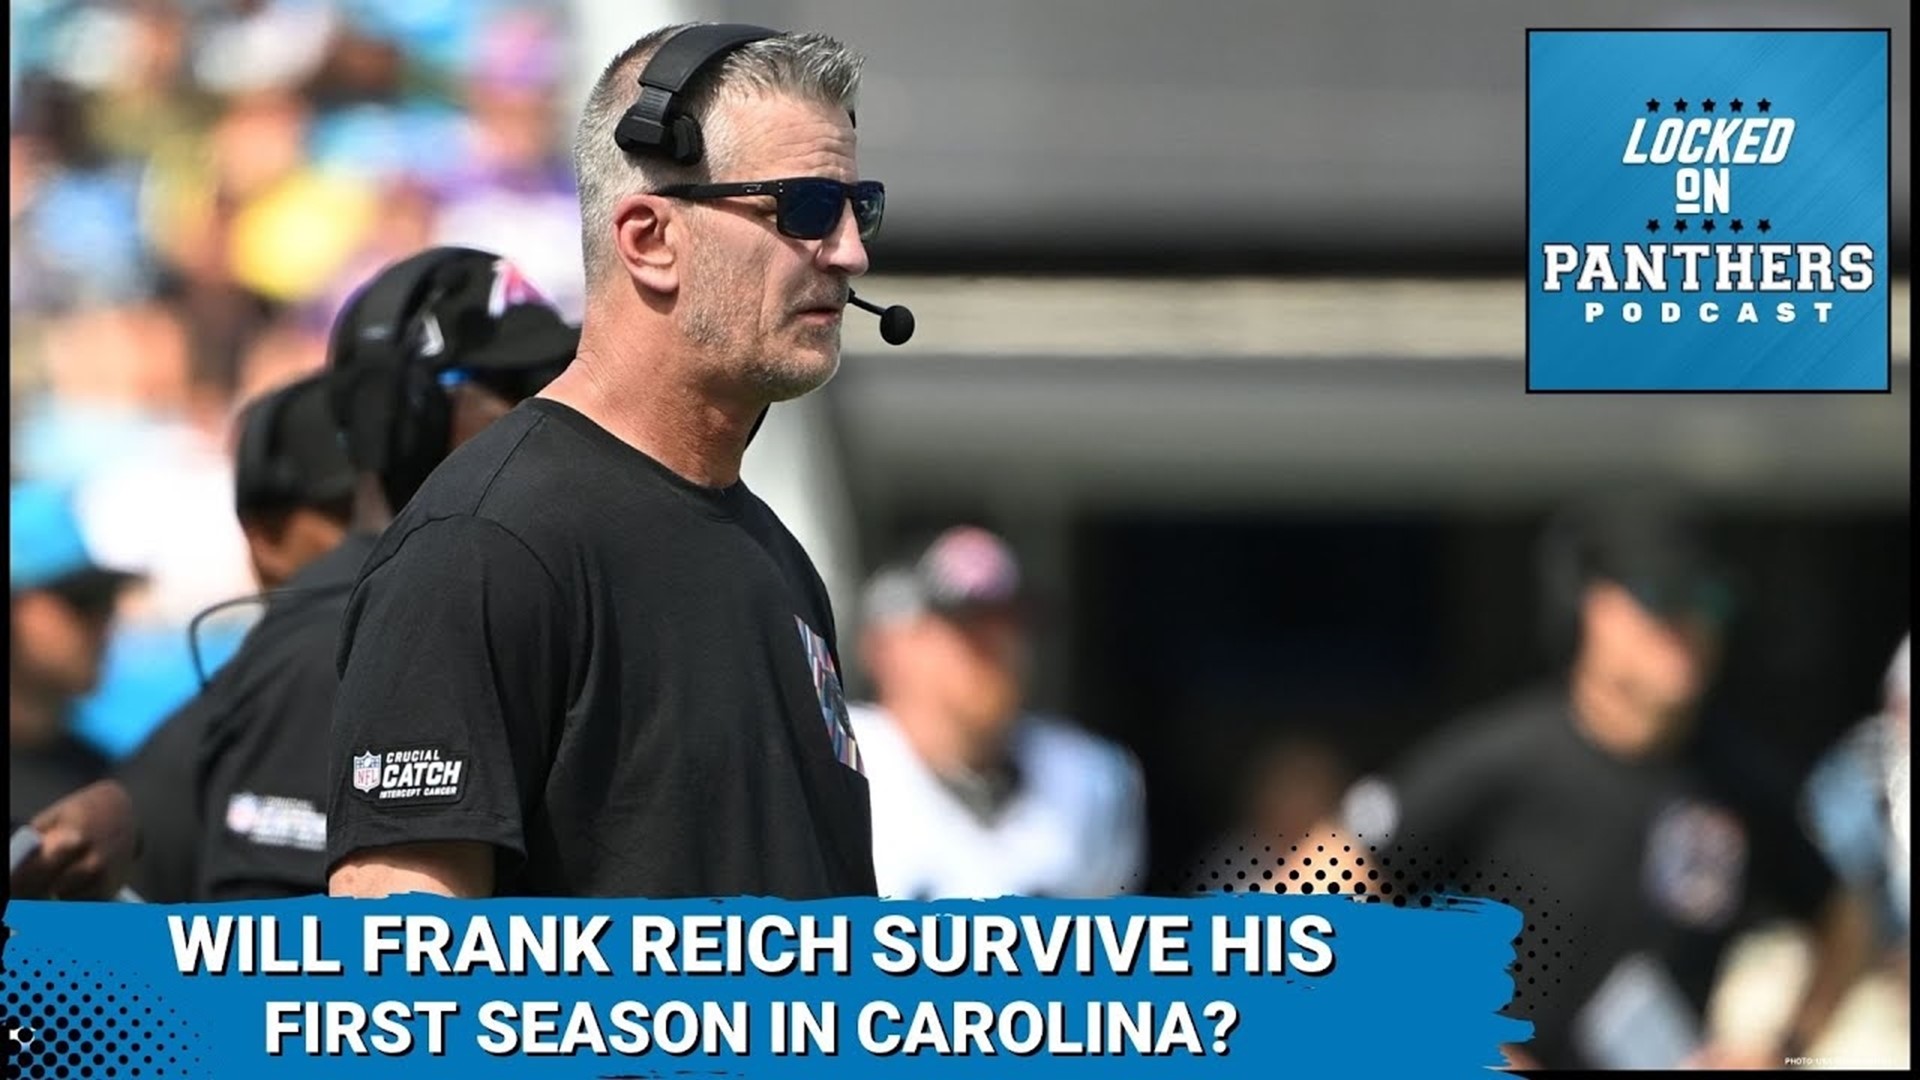 At 0-5 is it time to start considering whether Frank Reich will be a one-and-done coach in Carolina?